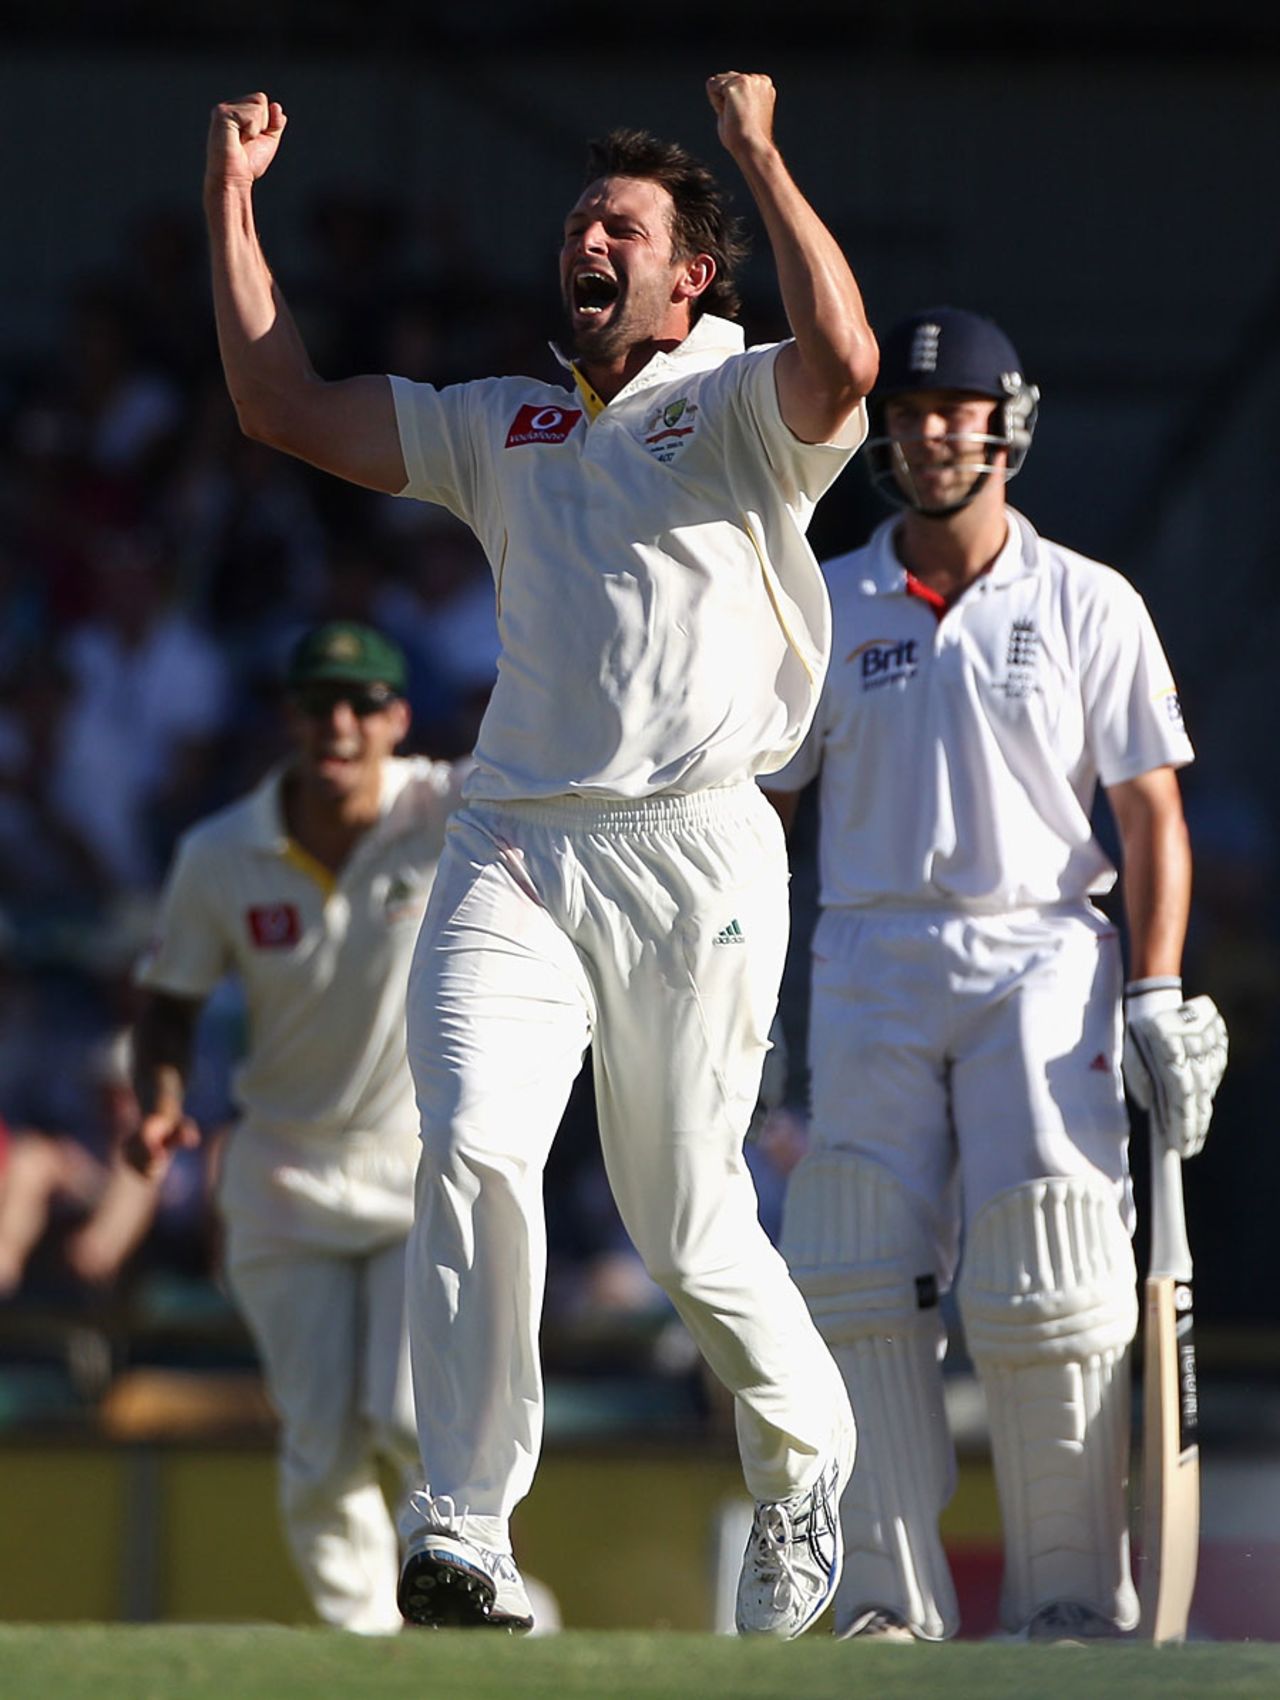 Ben Hilfenhaus roars his delight at taking his first wicket since the third ball of the series, Australia v England, 3rd Test, Perth, 3rd day, December 18, 2010